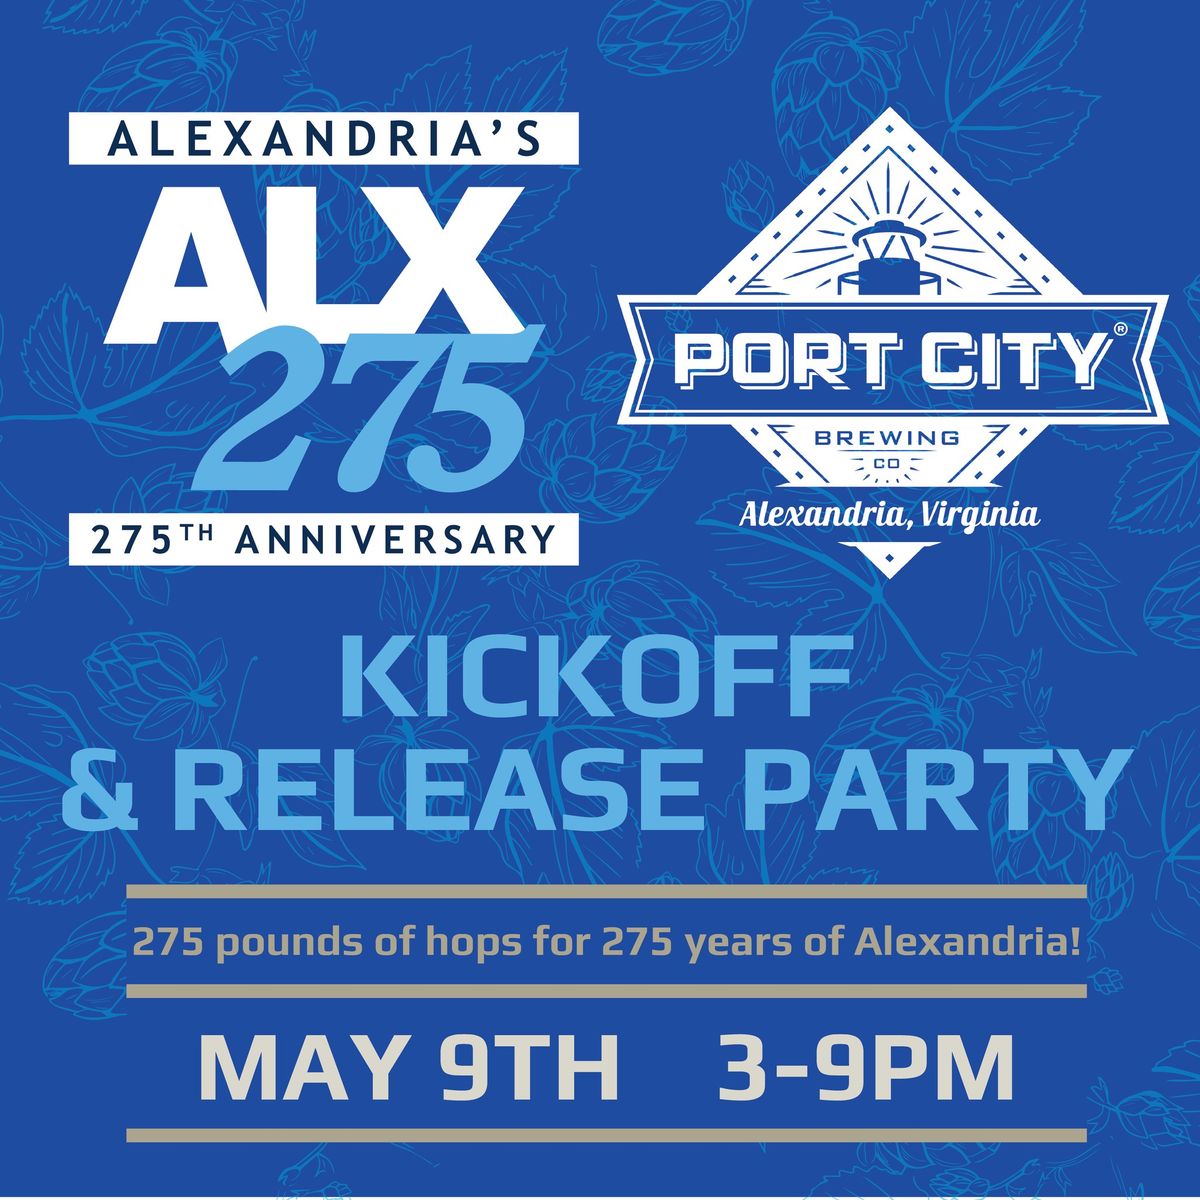 ALX275 Kickoff & Release Party